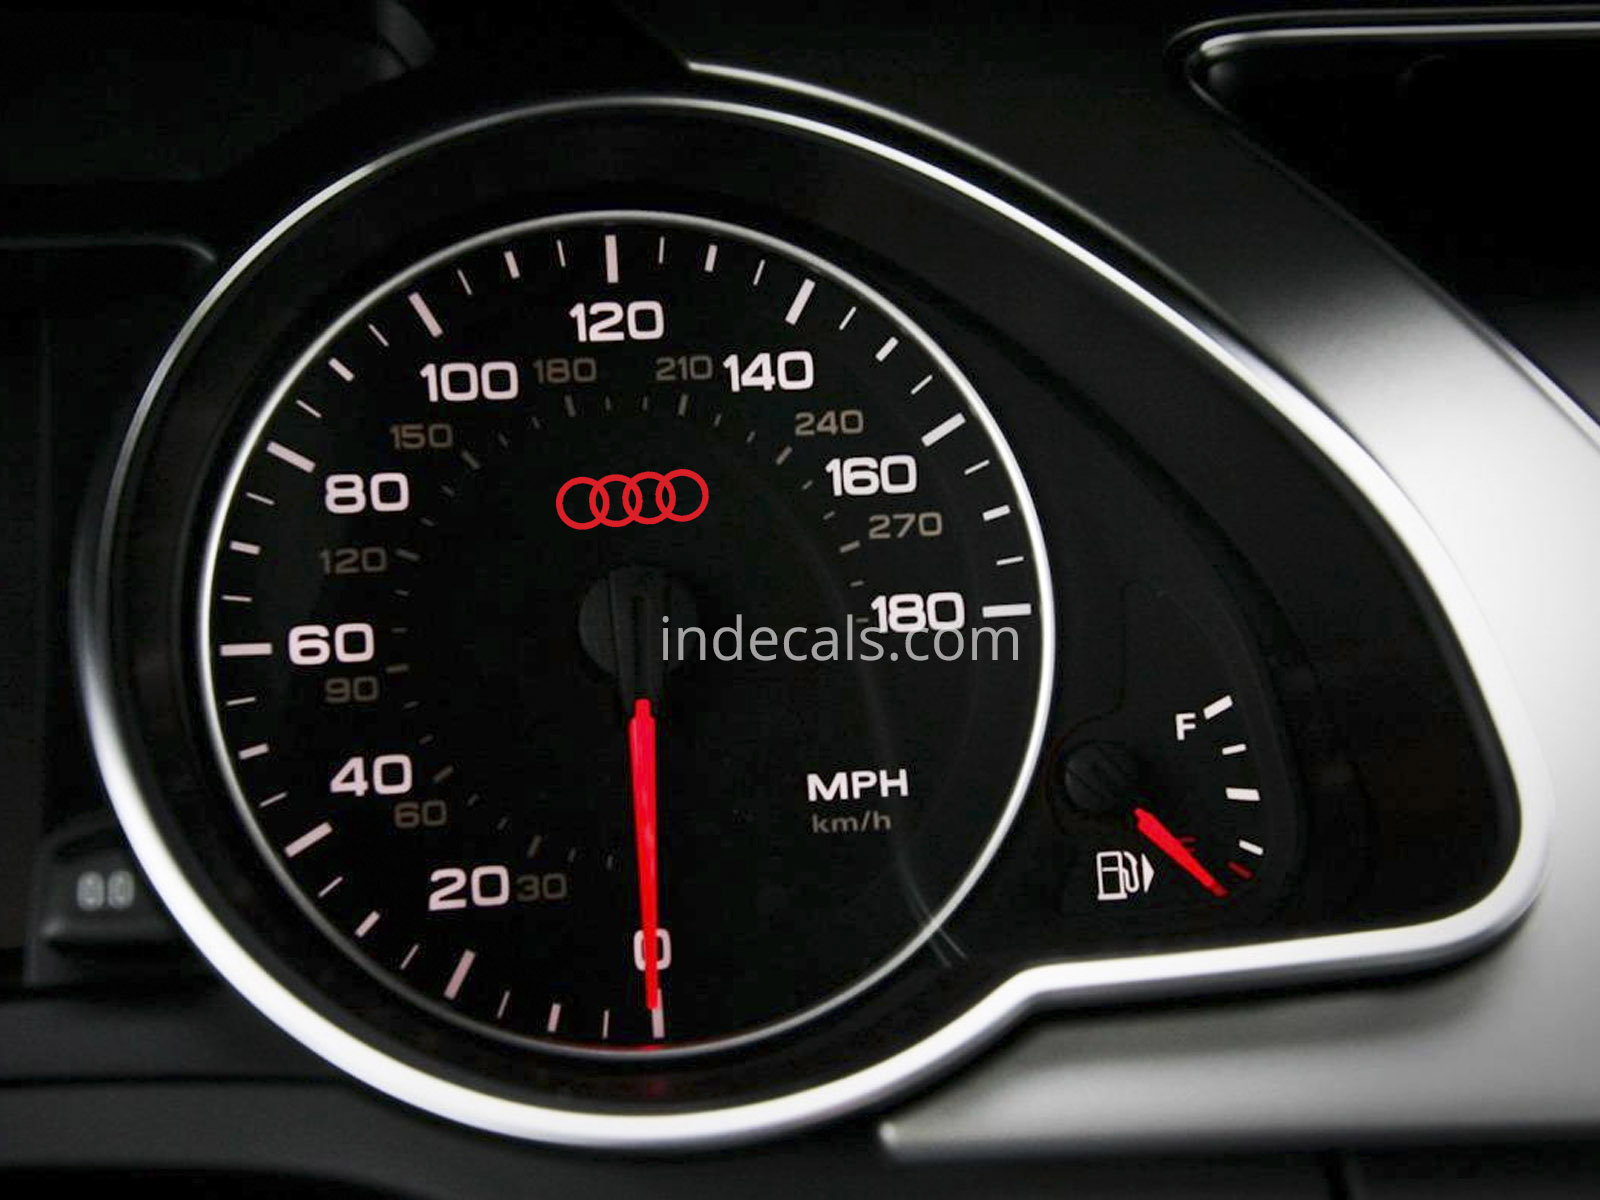 3 x Audi Rings Stickers for Speedometer - Red